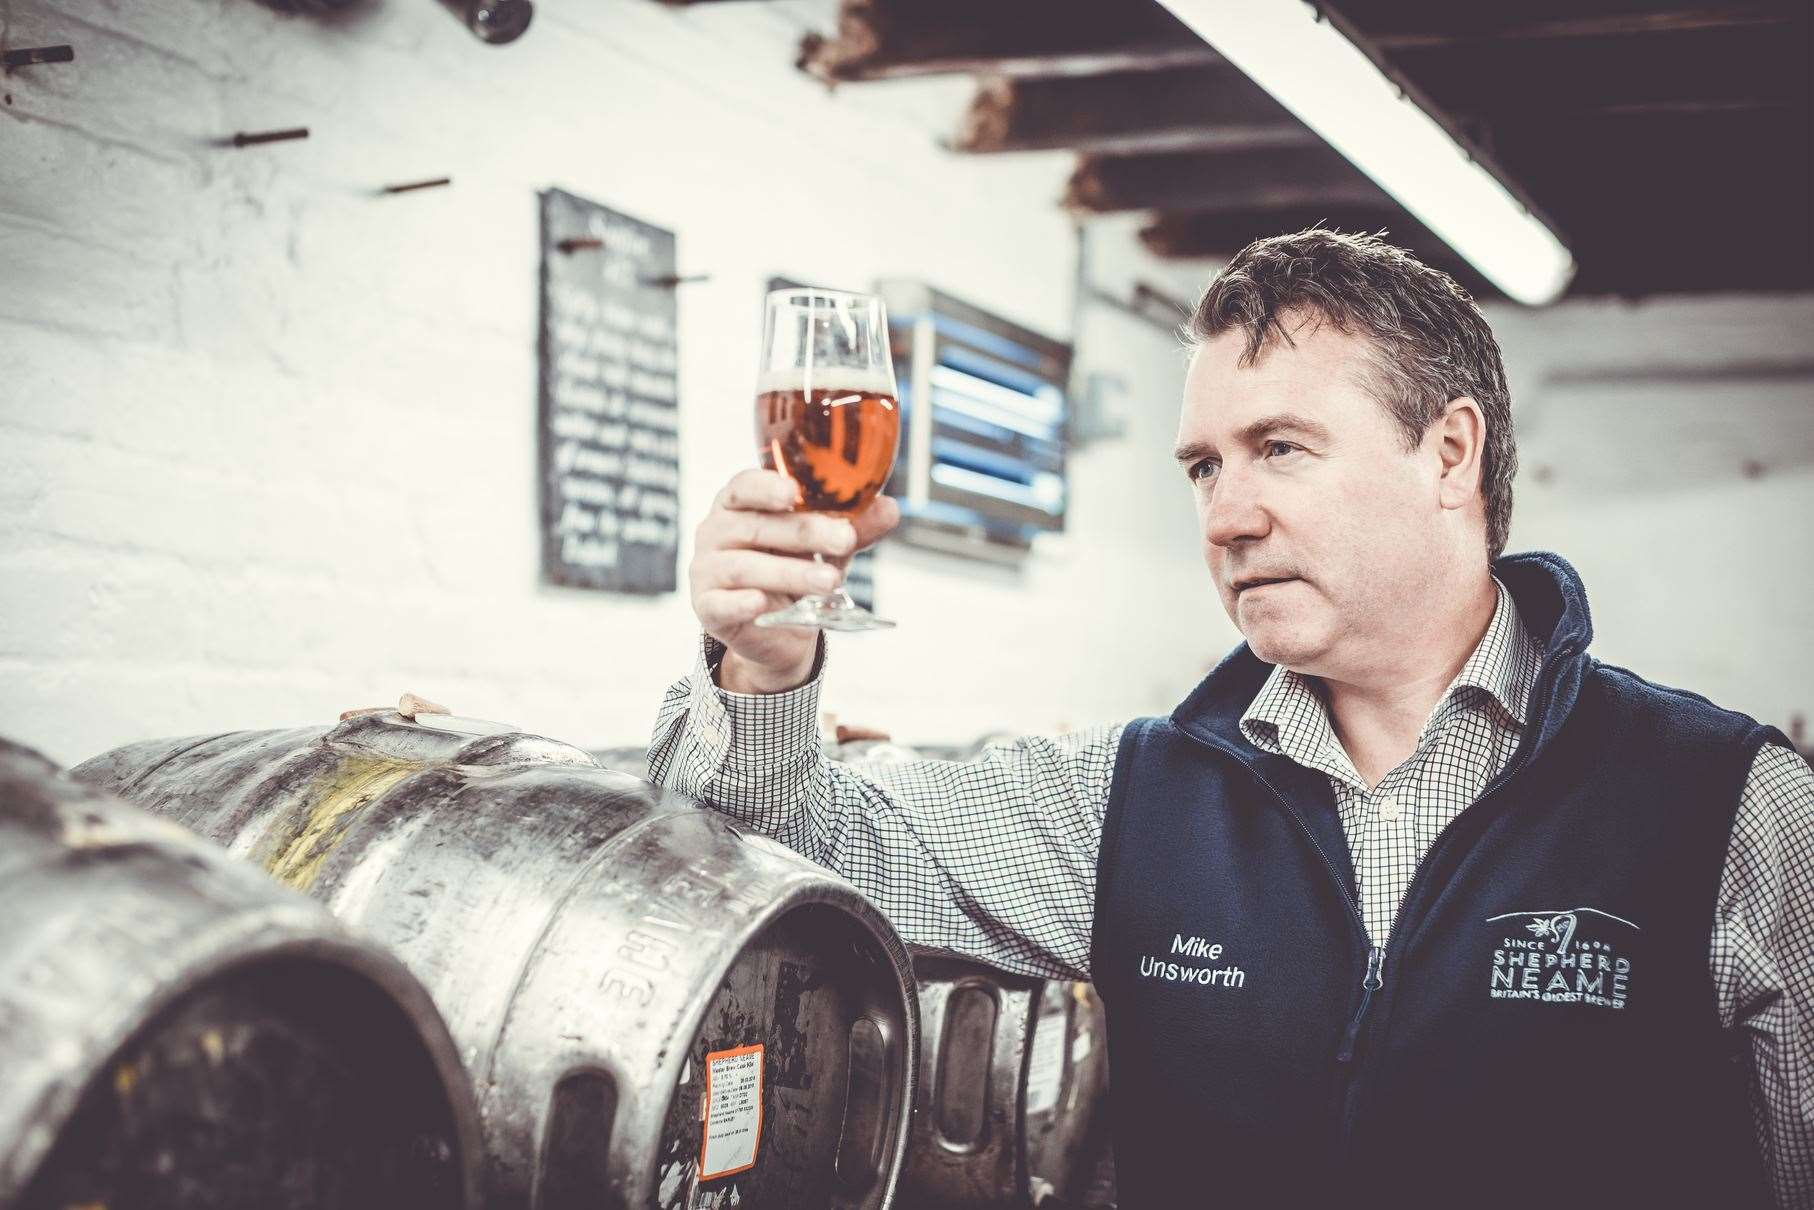 Shepherd Neame's head brewer Mike Unsworth checks the latest beer in production